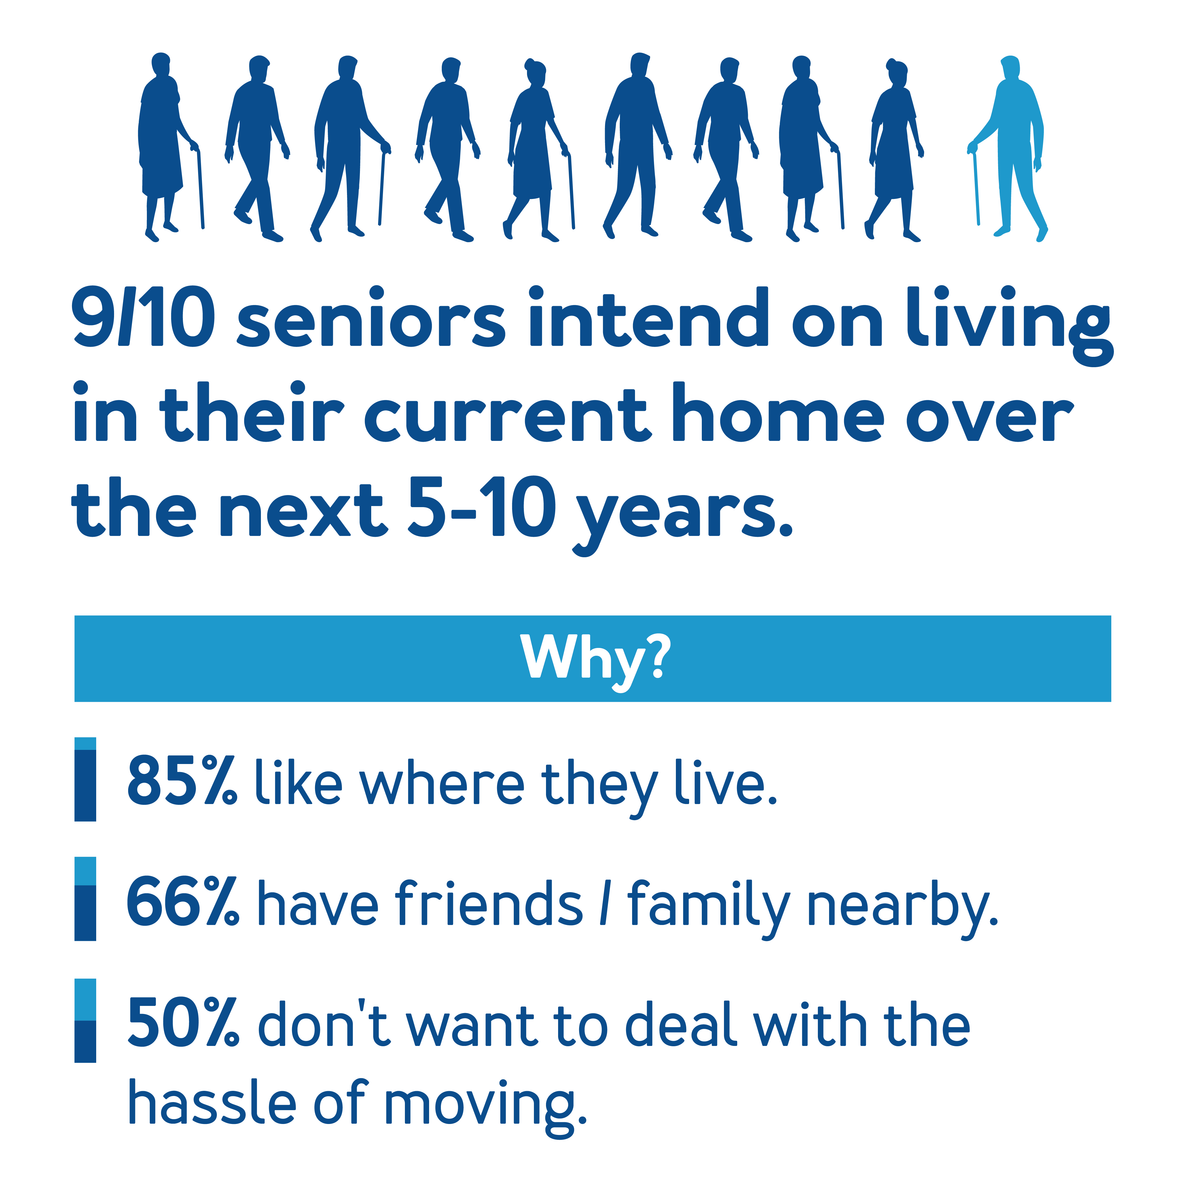 9/10 seniors intend on living in their current home over the next 5-10 years